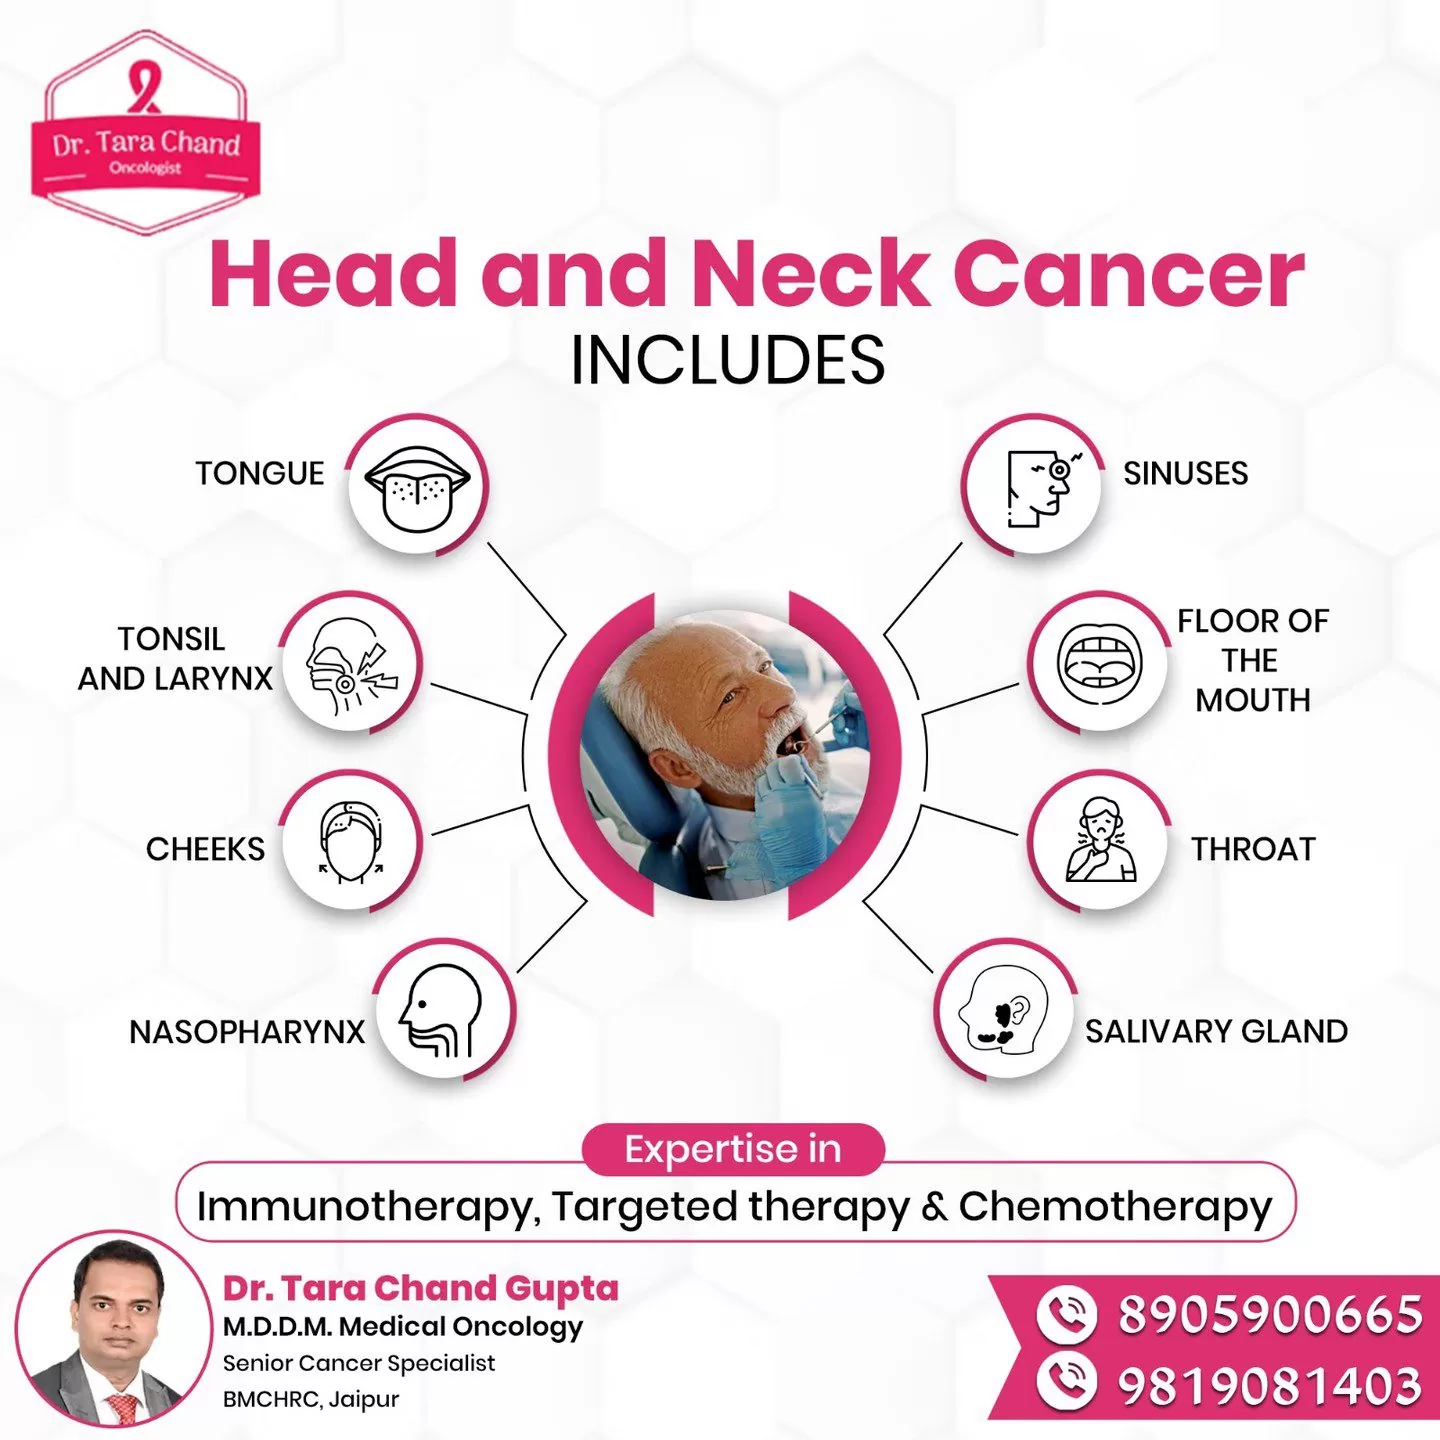 Symptoms of Head and Neck Cancer